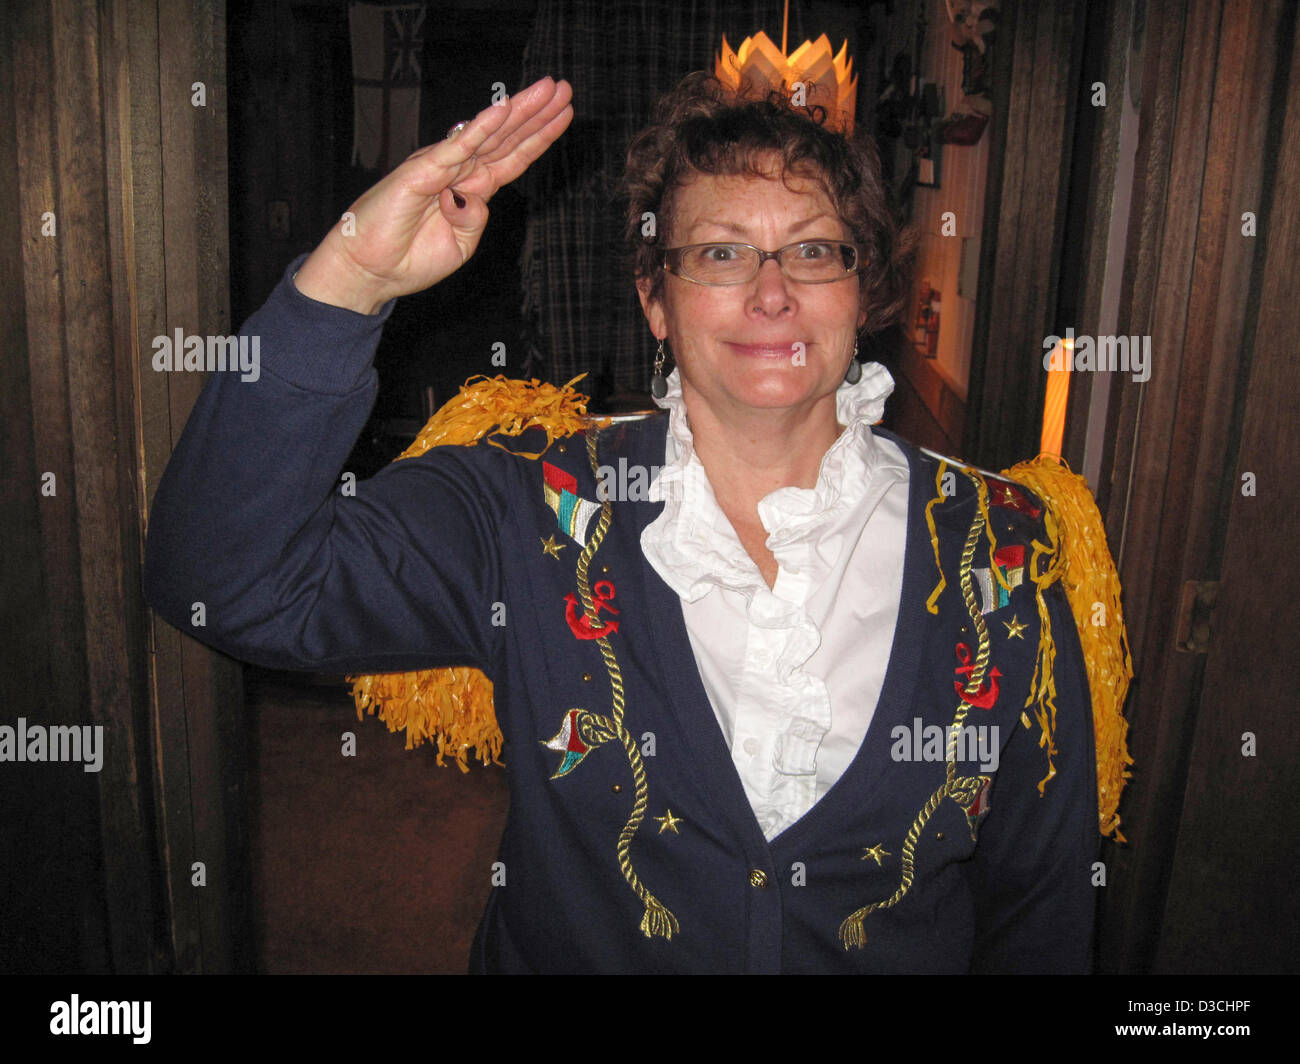 Commodore Annie Parcels saluting before a modern day rum Tot ceremony honoring Admiral Nelson of the Royal Navy, Ironwood Michigan MI Upper Peninsula U.P. USA, on Friday February 08, 2013. One of the many après-ski events which brings out hidden talents of many individuals. Stock Photo